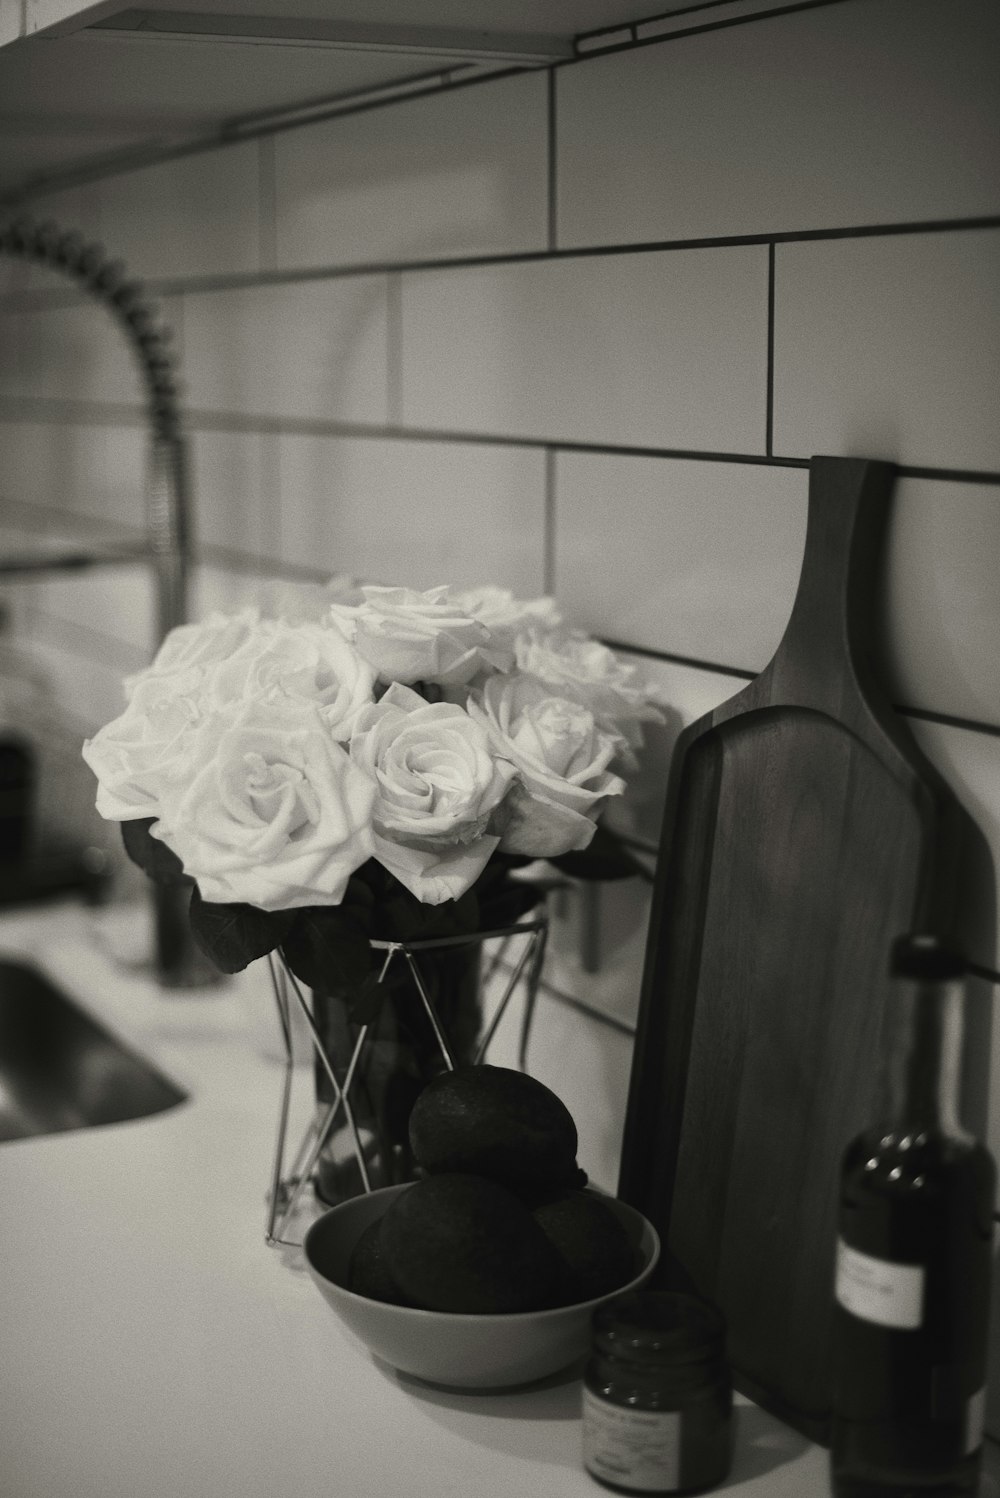 a black and white photo of a vase of roses